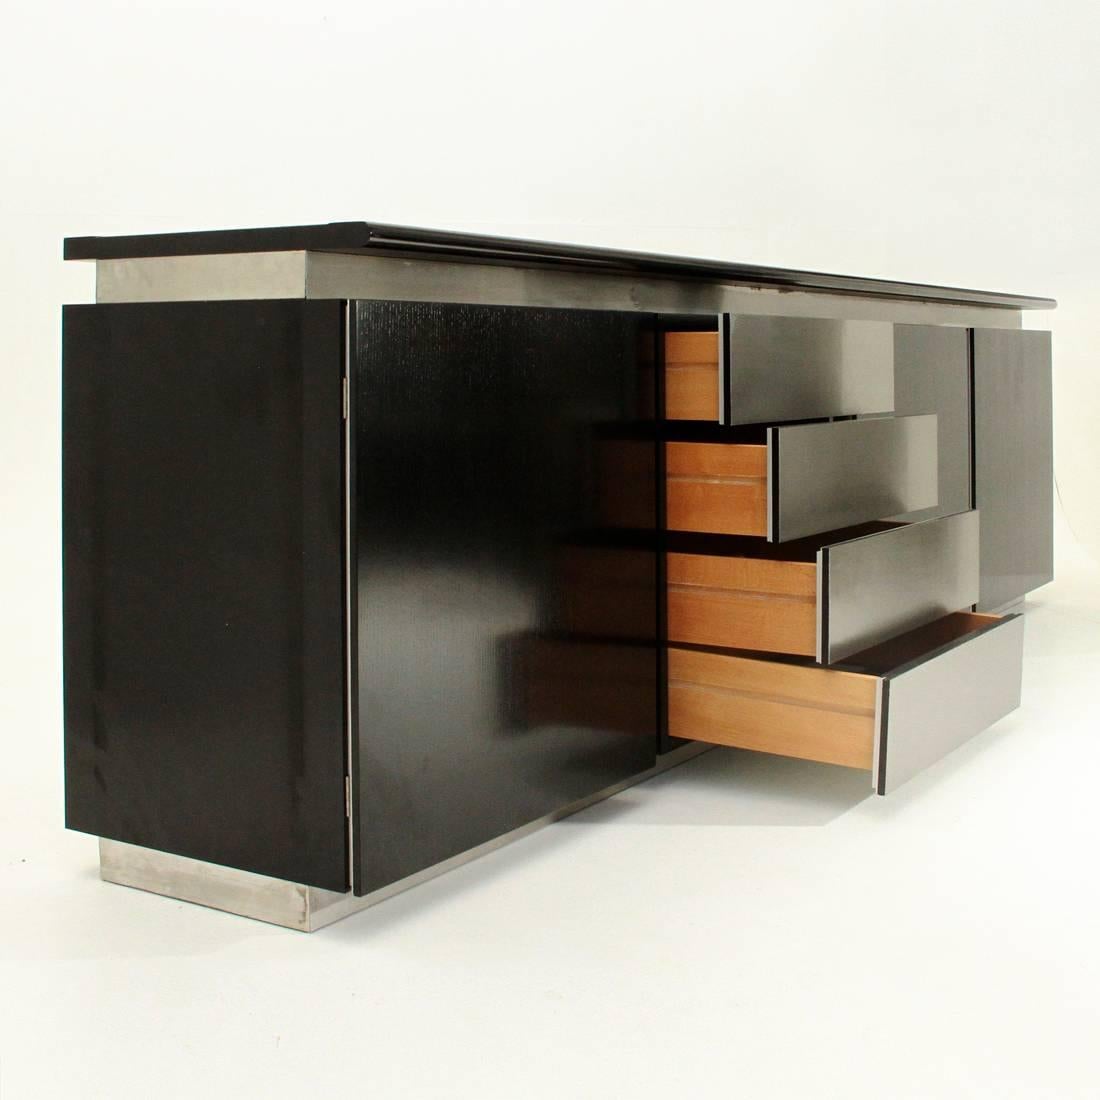 Late 20th Century Parioli Sideboard by Lodovico Acerbis and Giotto Stoppino for Acerbis